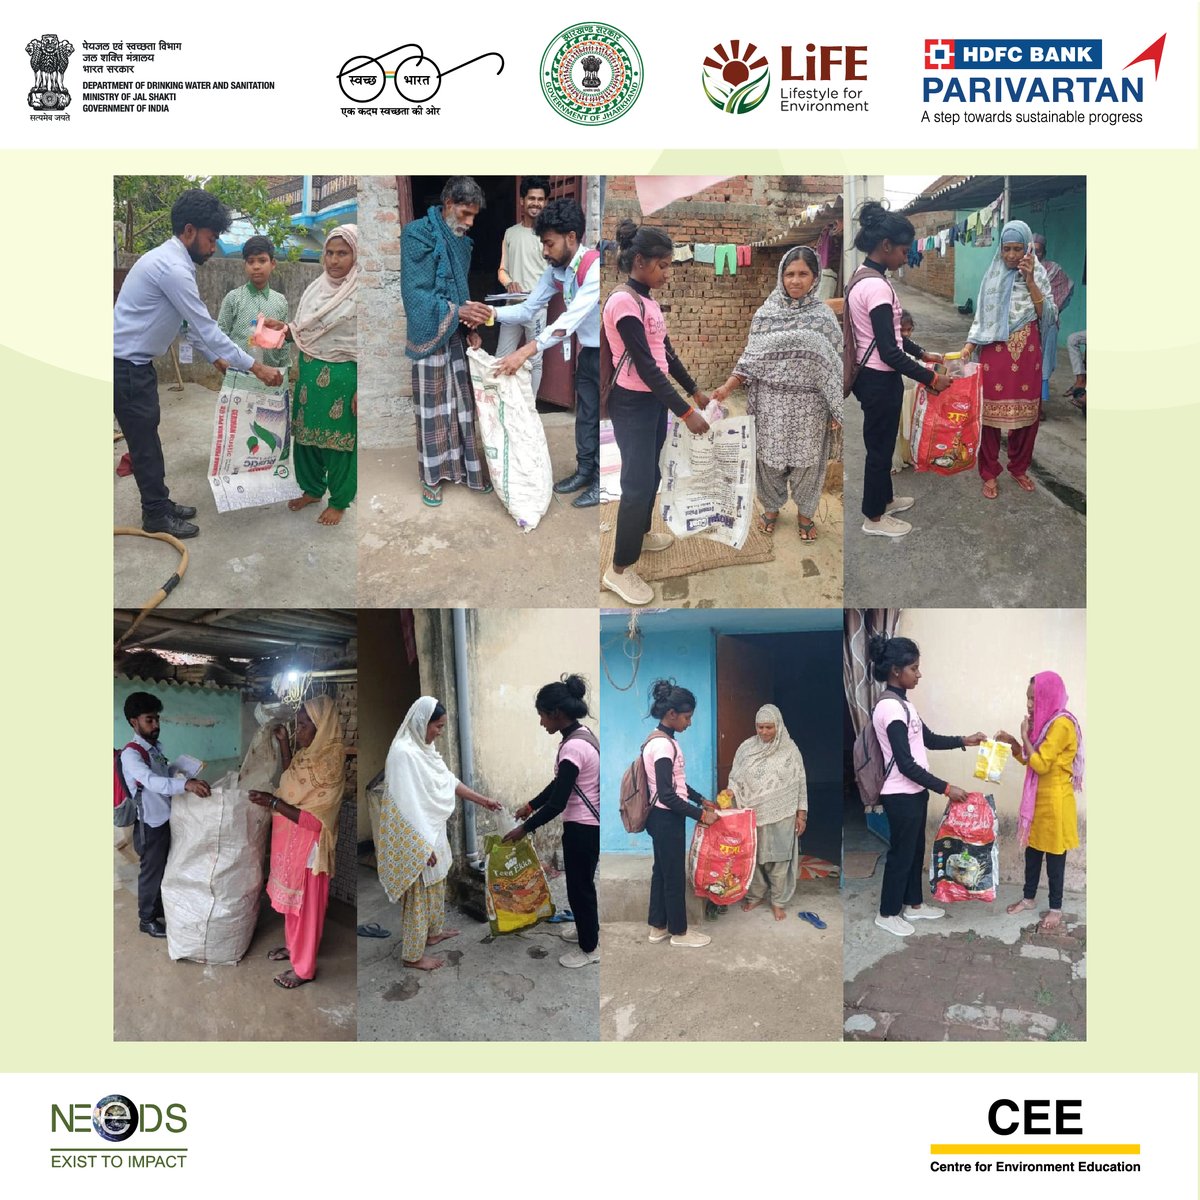 Under HDFC Bank, CEE & NEEDS project ‘Rural & Urban Landscape Free of Dry & Plastic Waste’ in Ranchi, a campaign 'Mera Plastic Meri Zimmedari' was organised to create awareness on dry & plastic waste collection & segregation processes at households to make their village clean.